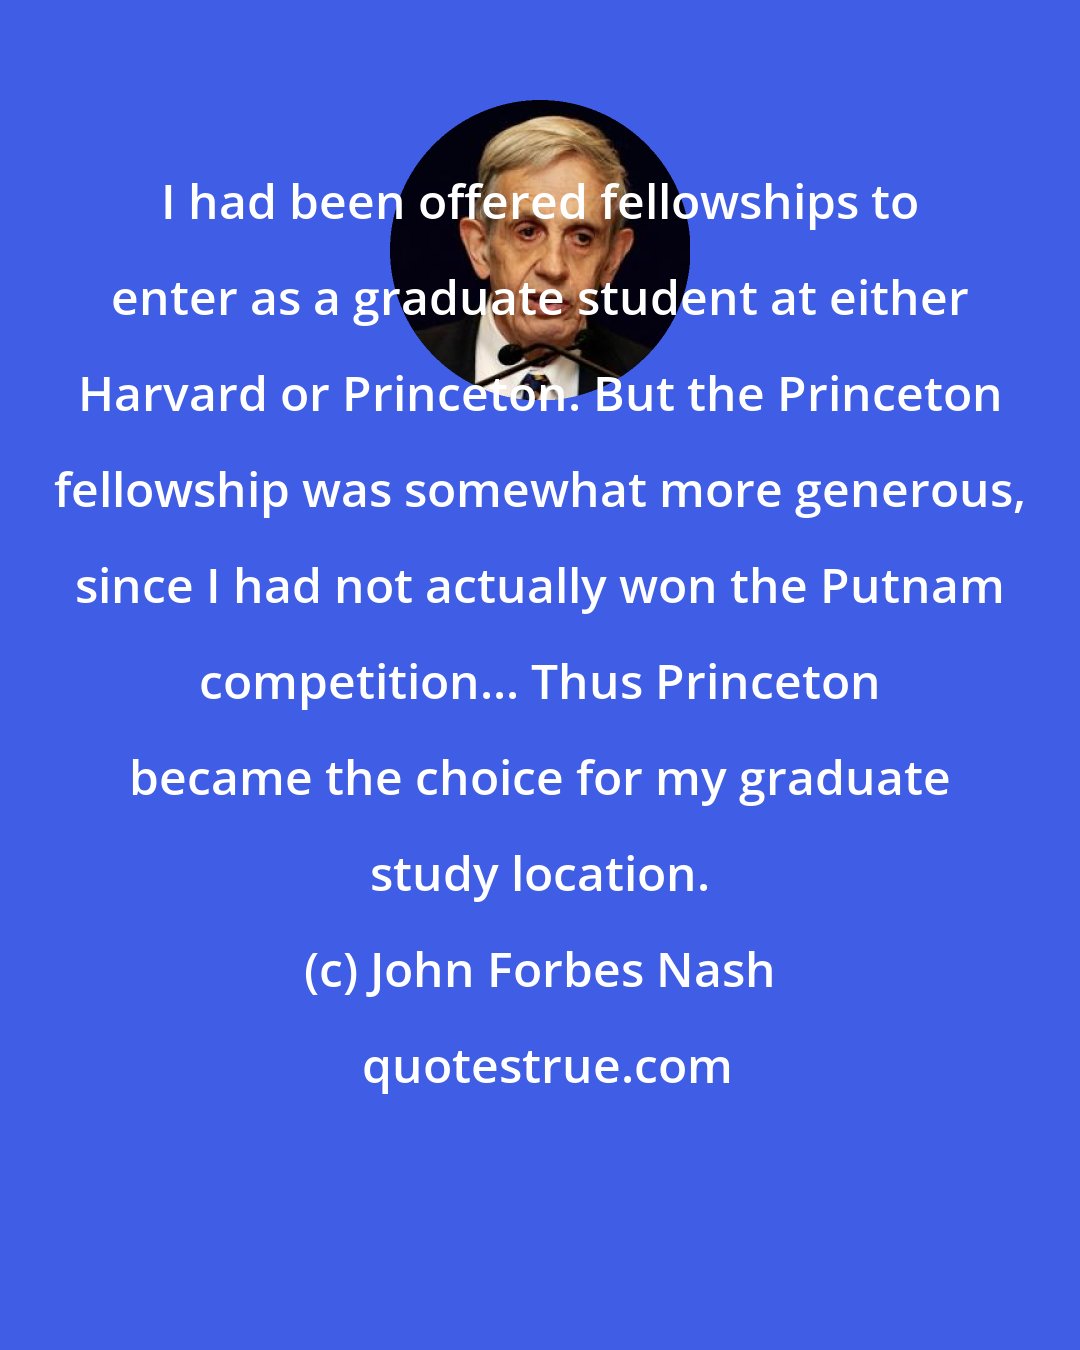 John Forbes Nash: I had been offered fellowships to enter as a graduate student at either Harvard or Princeton. But the Princeton fellowship was somewhat more generous, since I had not actually won the Putnam competition... Thus Princeton became the choice for my graduate study location.